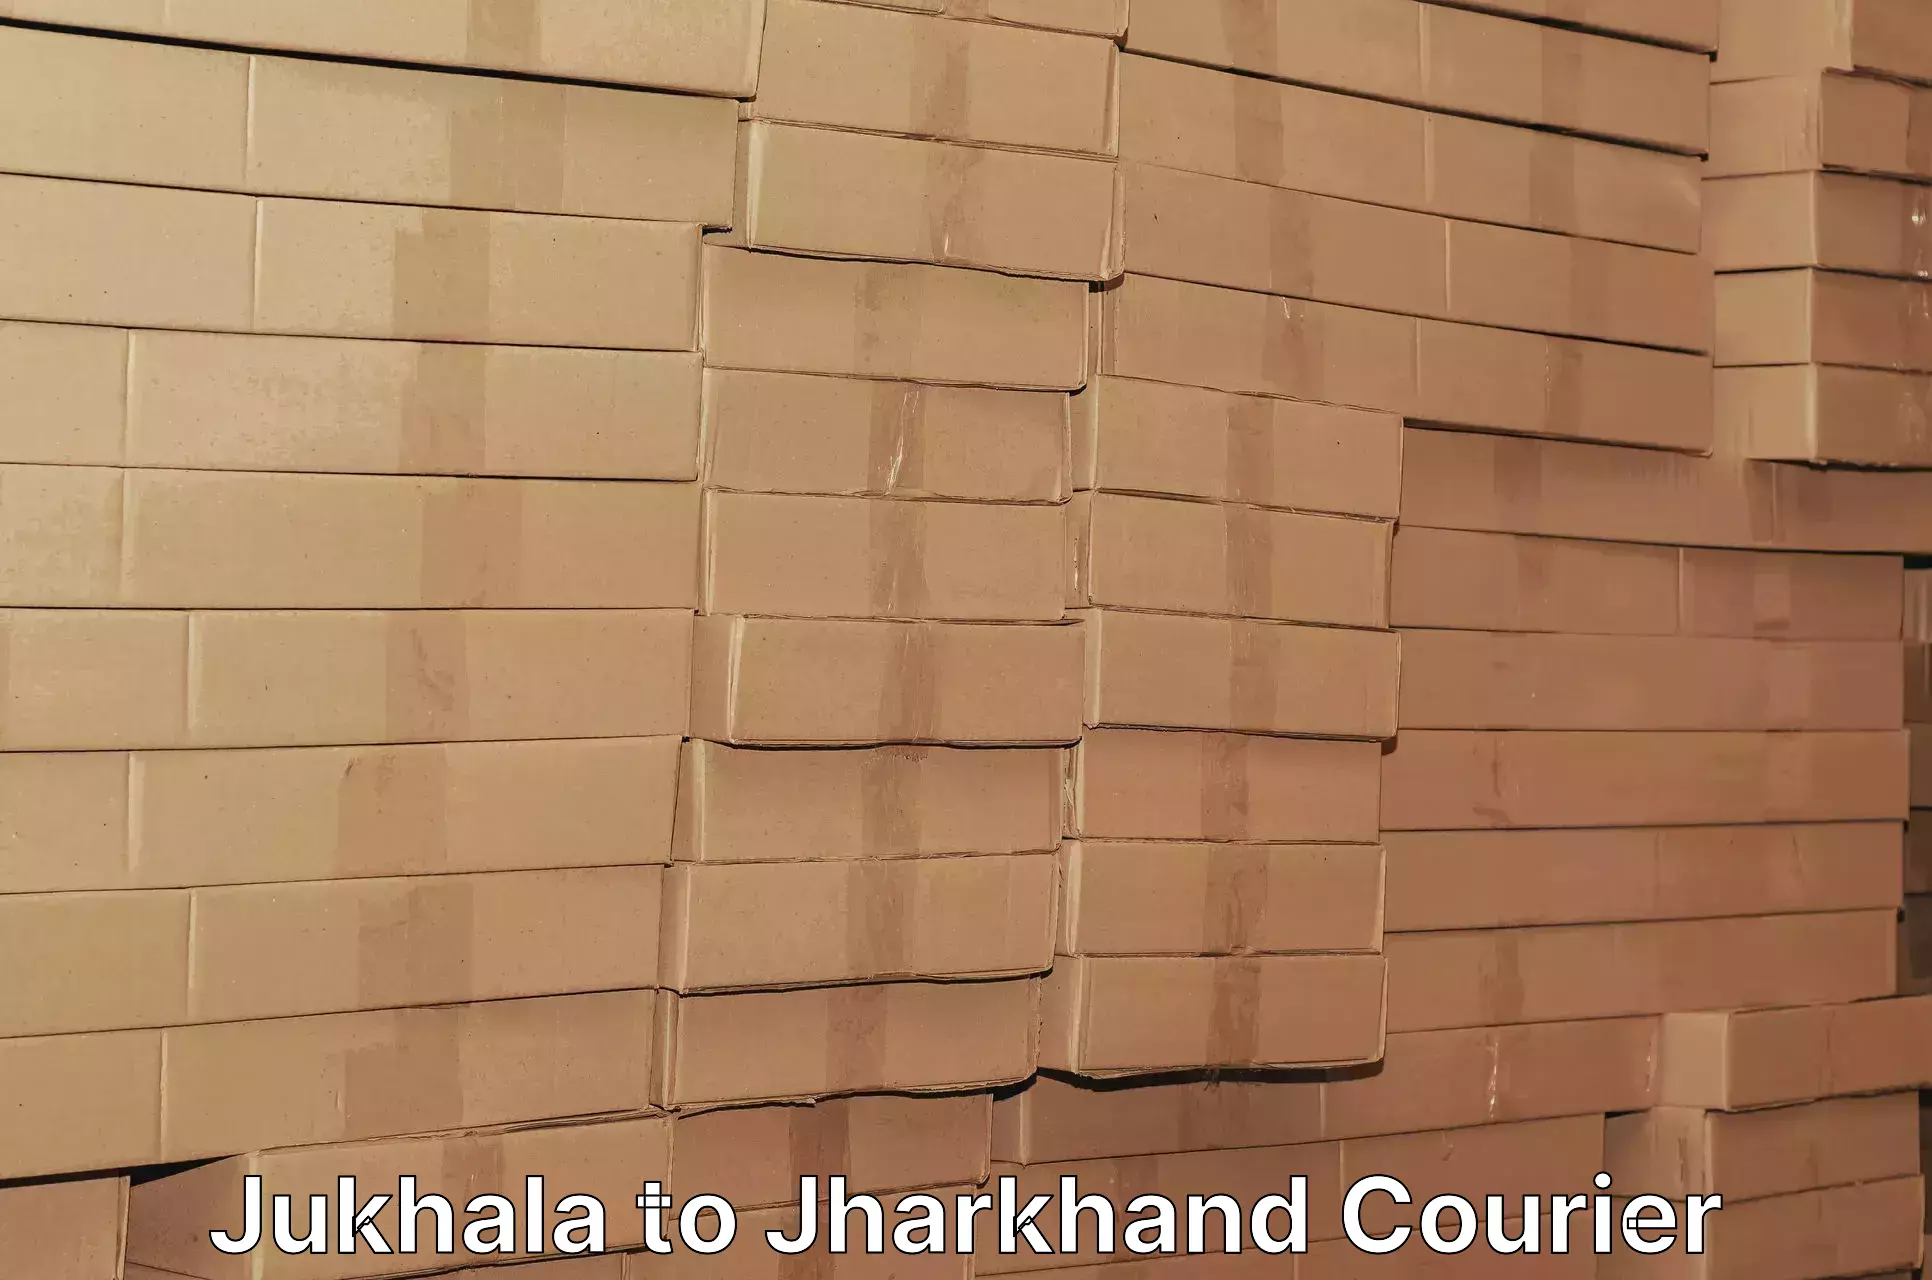 24-hour courier services Jukhala to Koderma